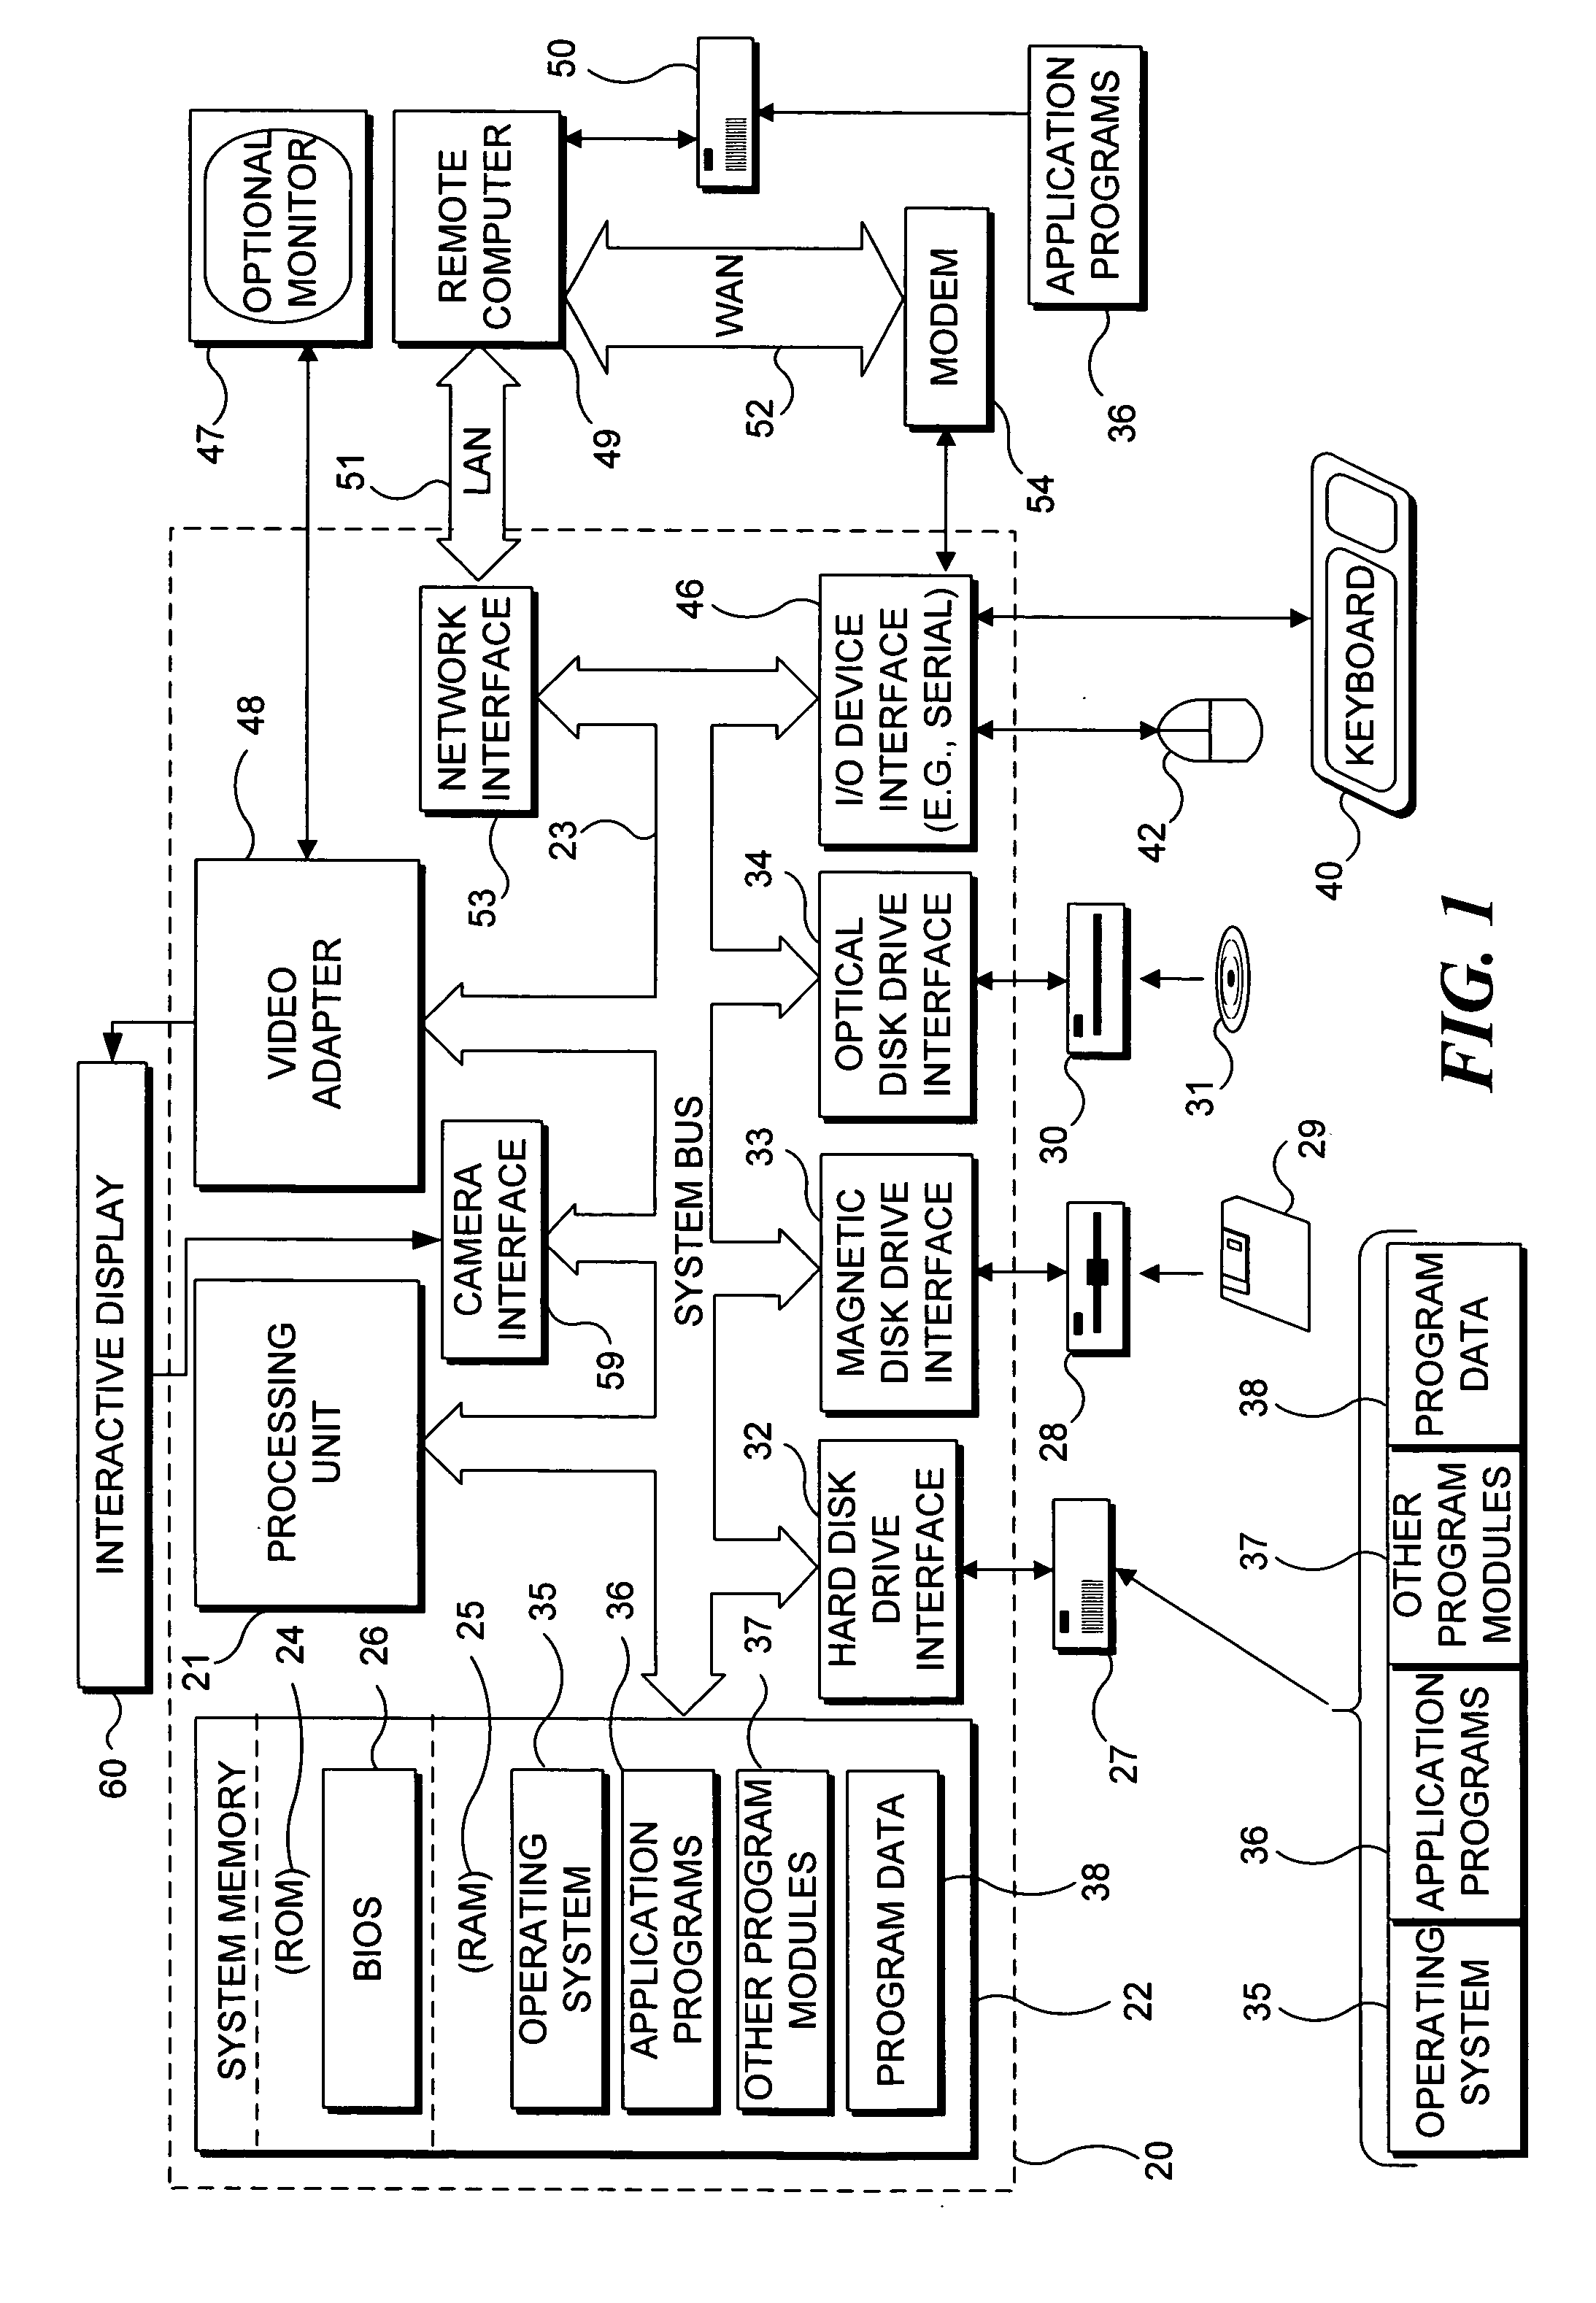 Method for controlling an intensity of an infrared source used to detect objects adjacent to an interactive display surface